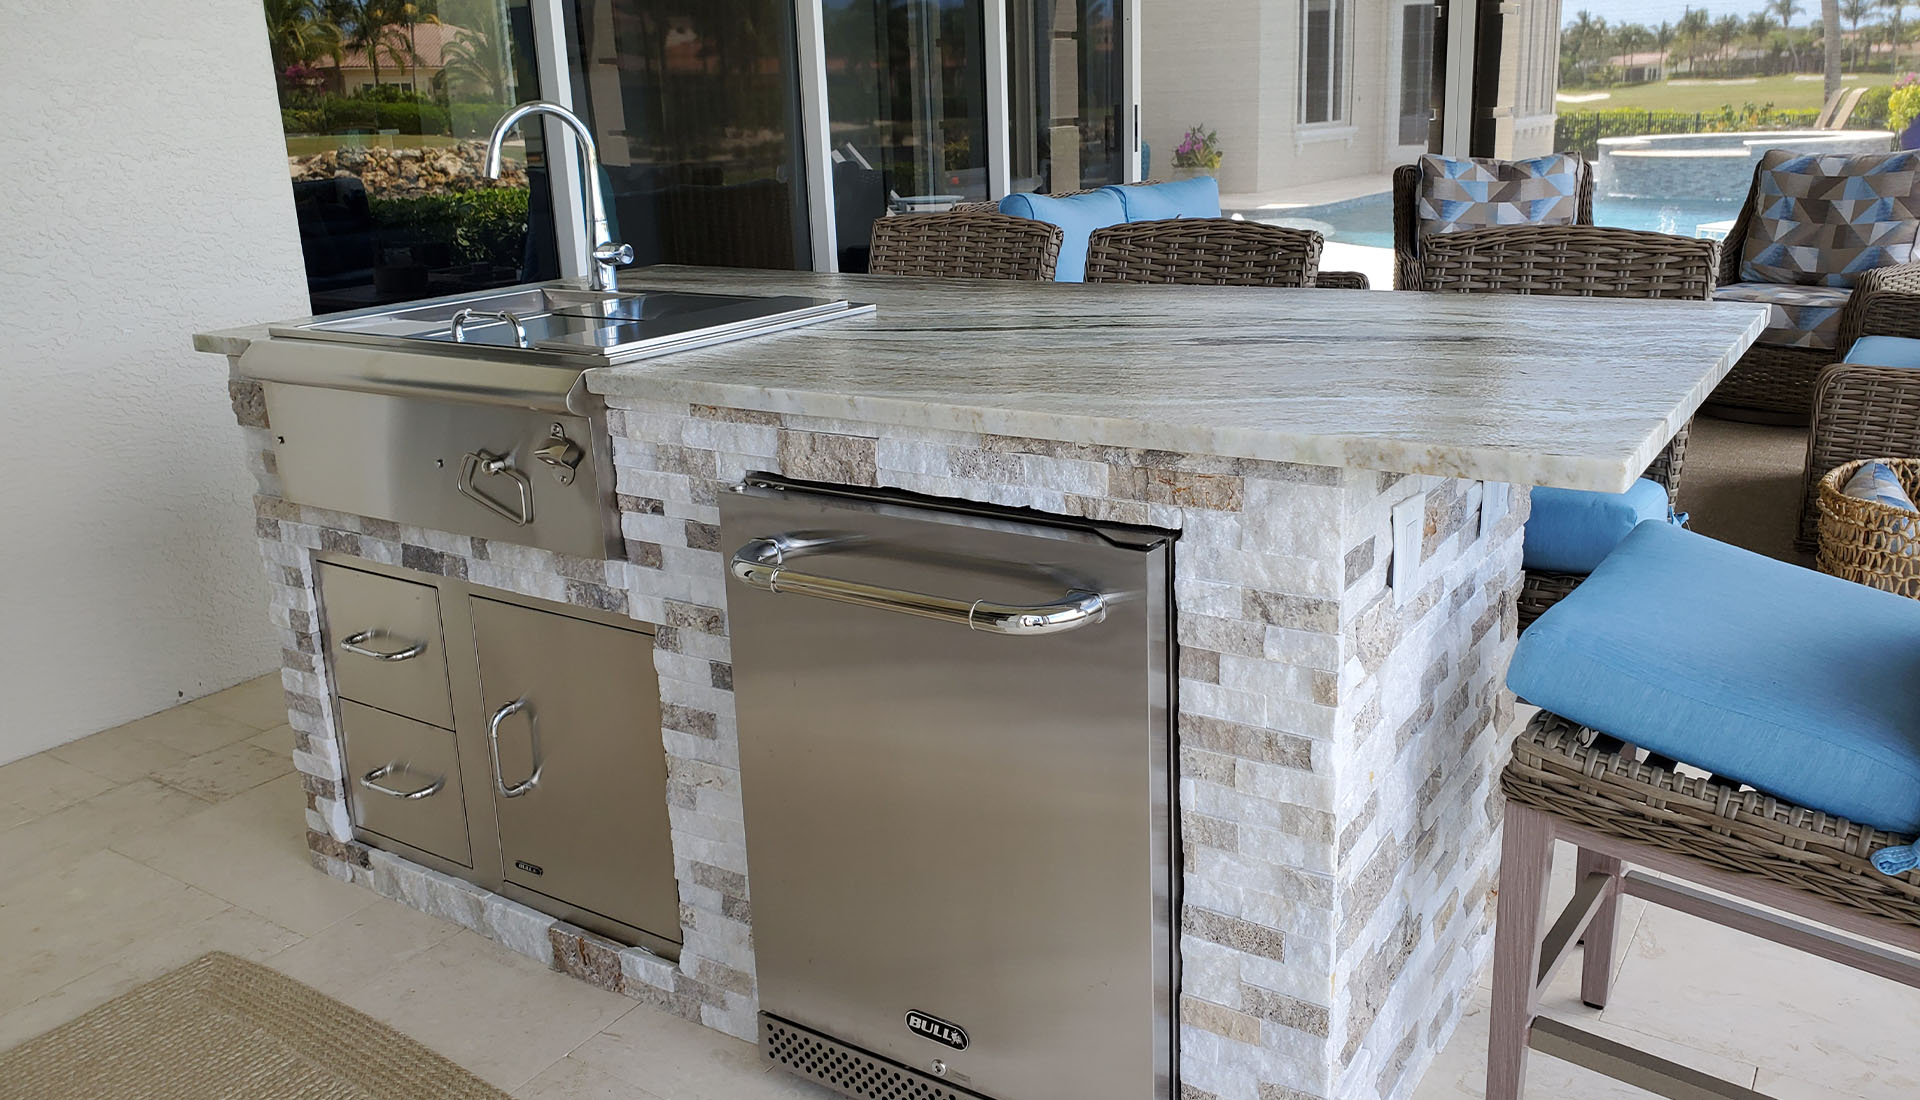 Complete Outdoor Kitchen #1 design with island, grill and fridge by Pool and Deck Concepts